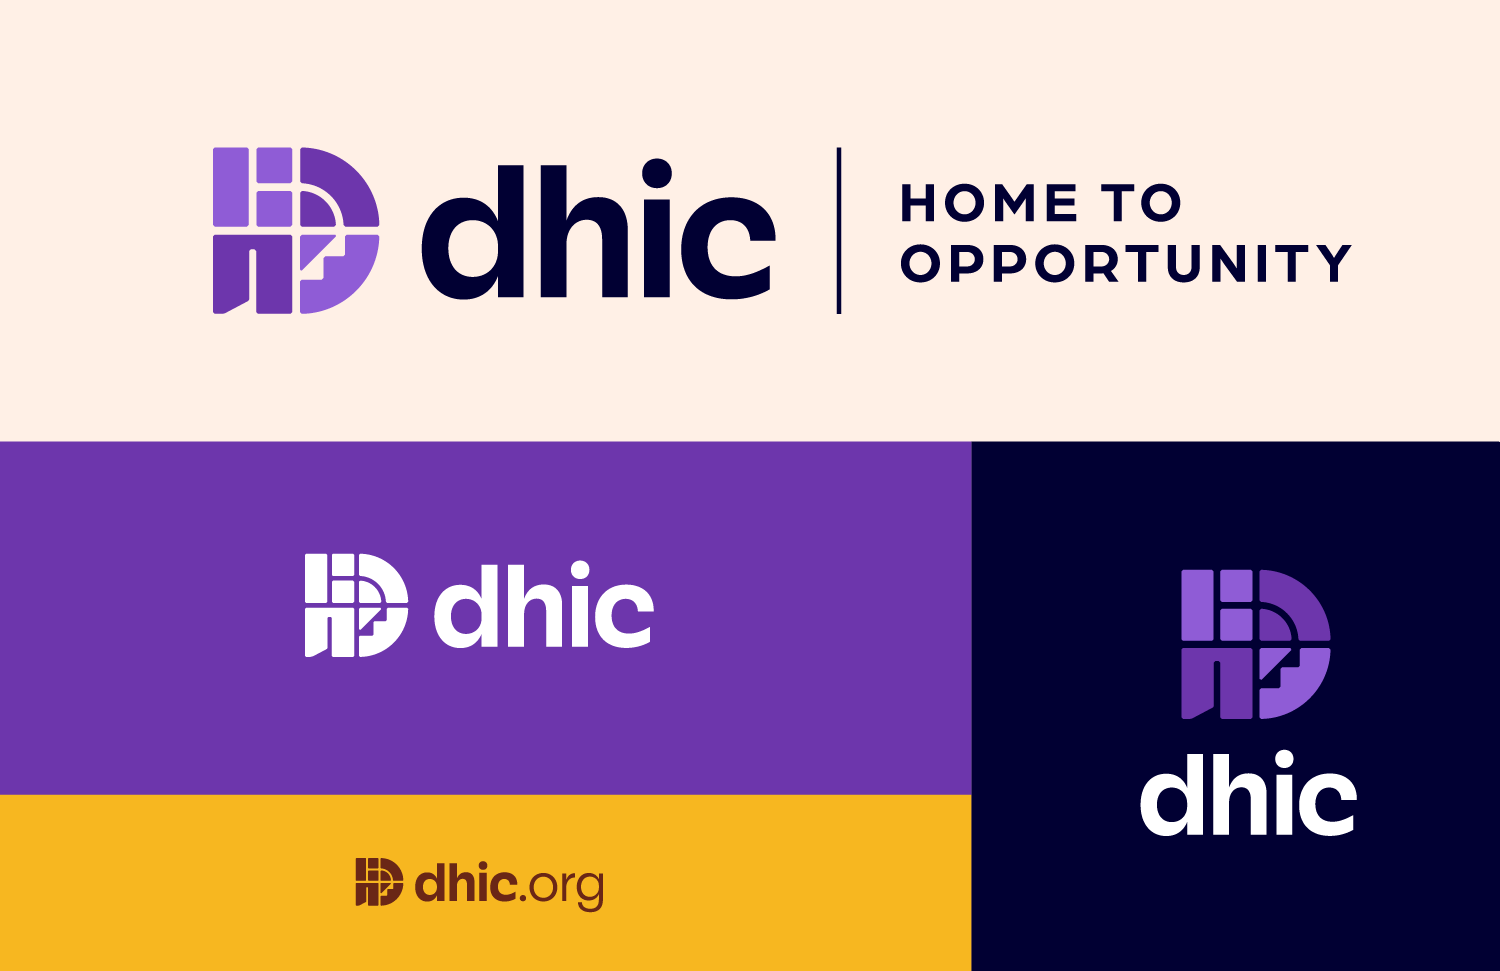 A grid of the various DHIC logos on various colored backgrounds